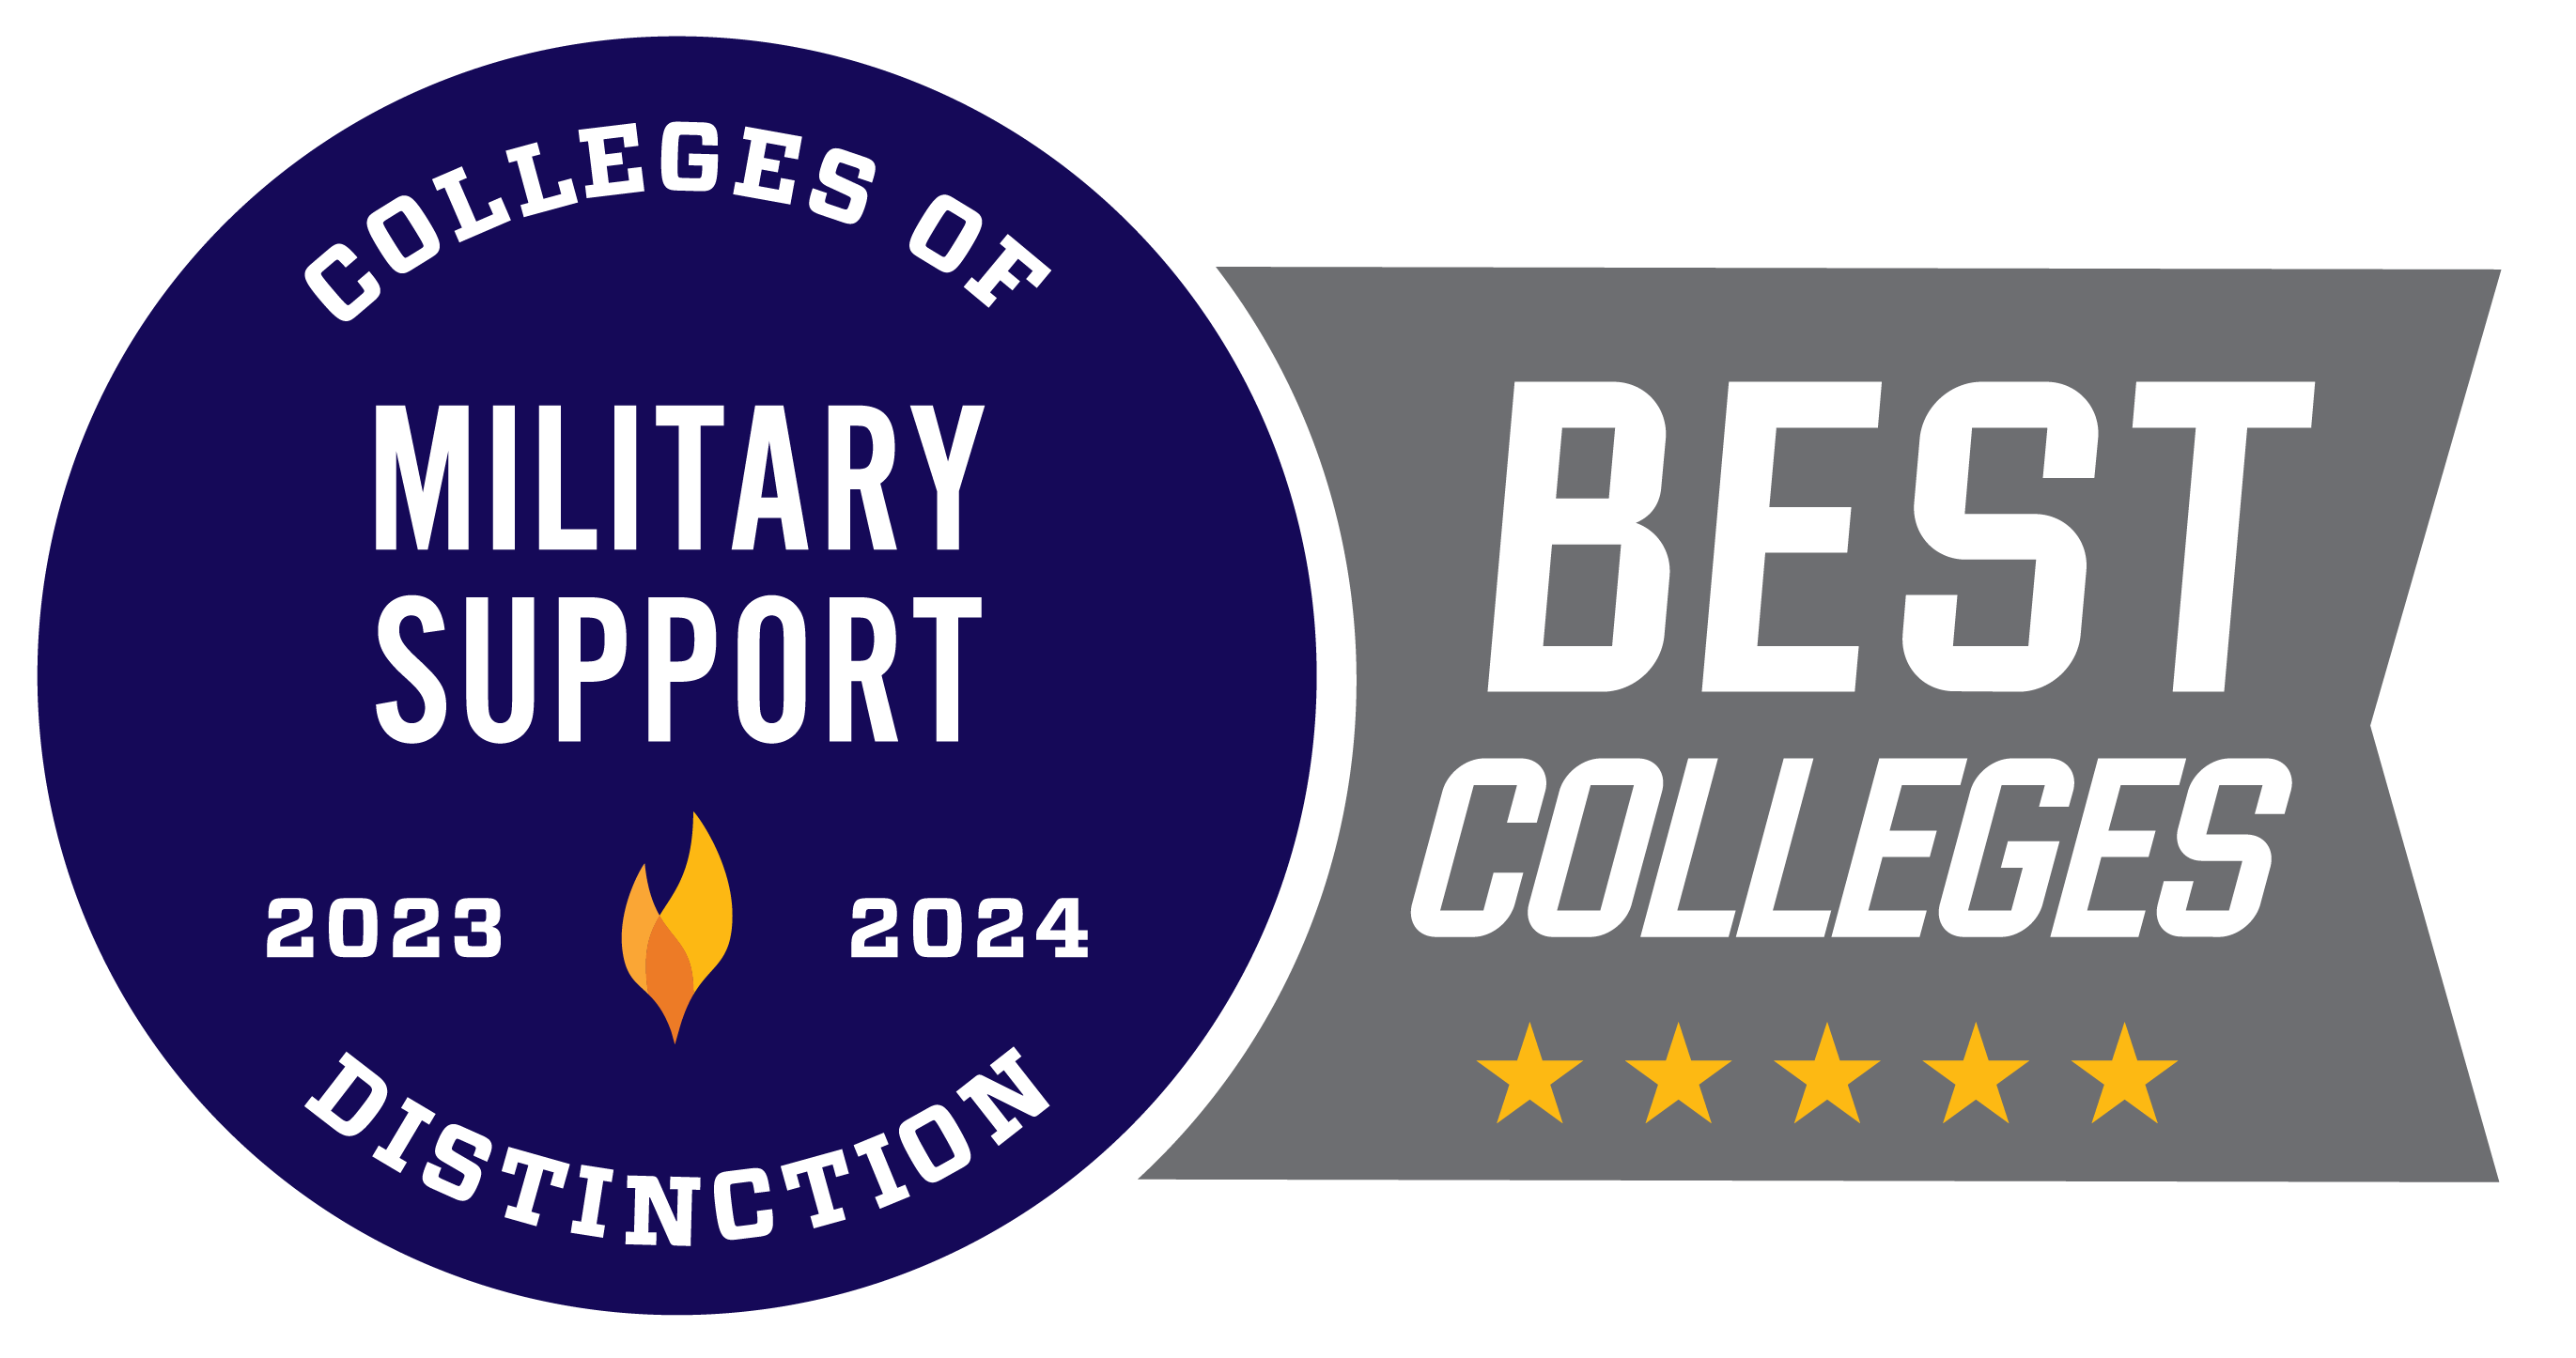 College of Distinction: Military Support badge